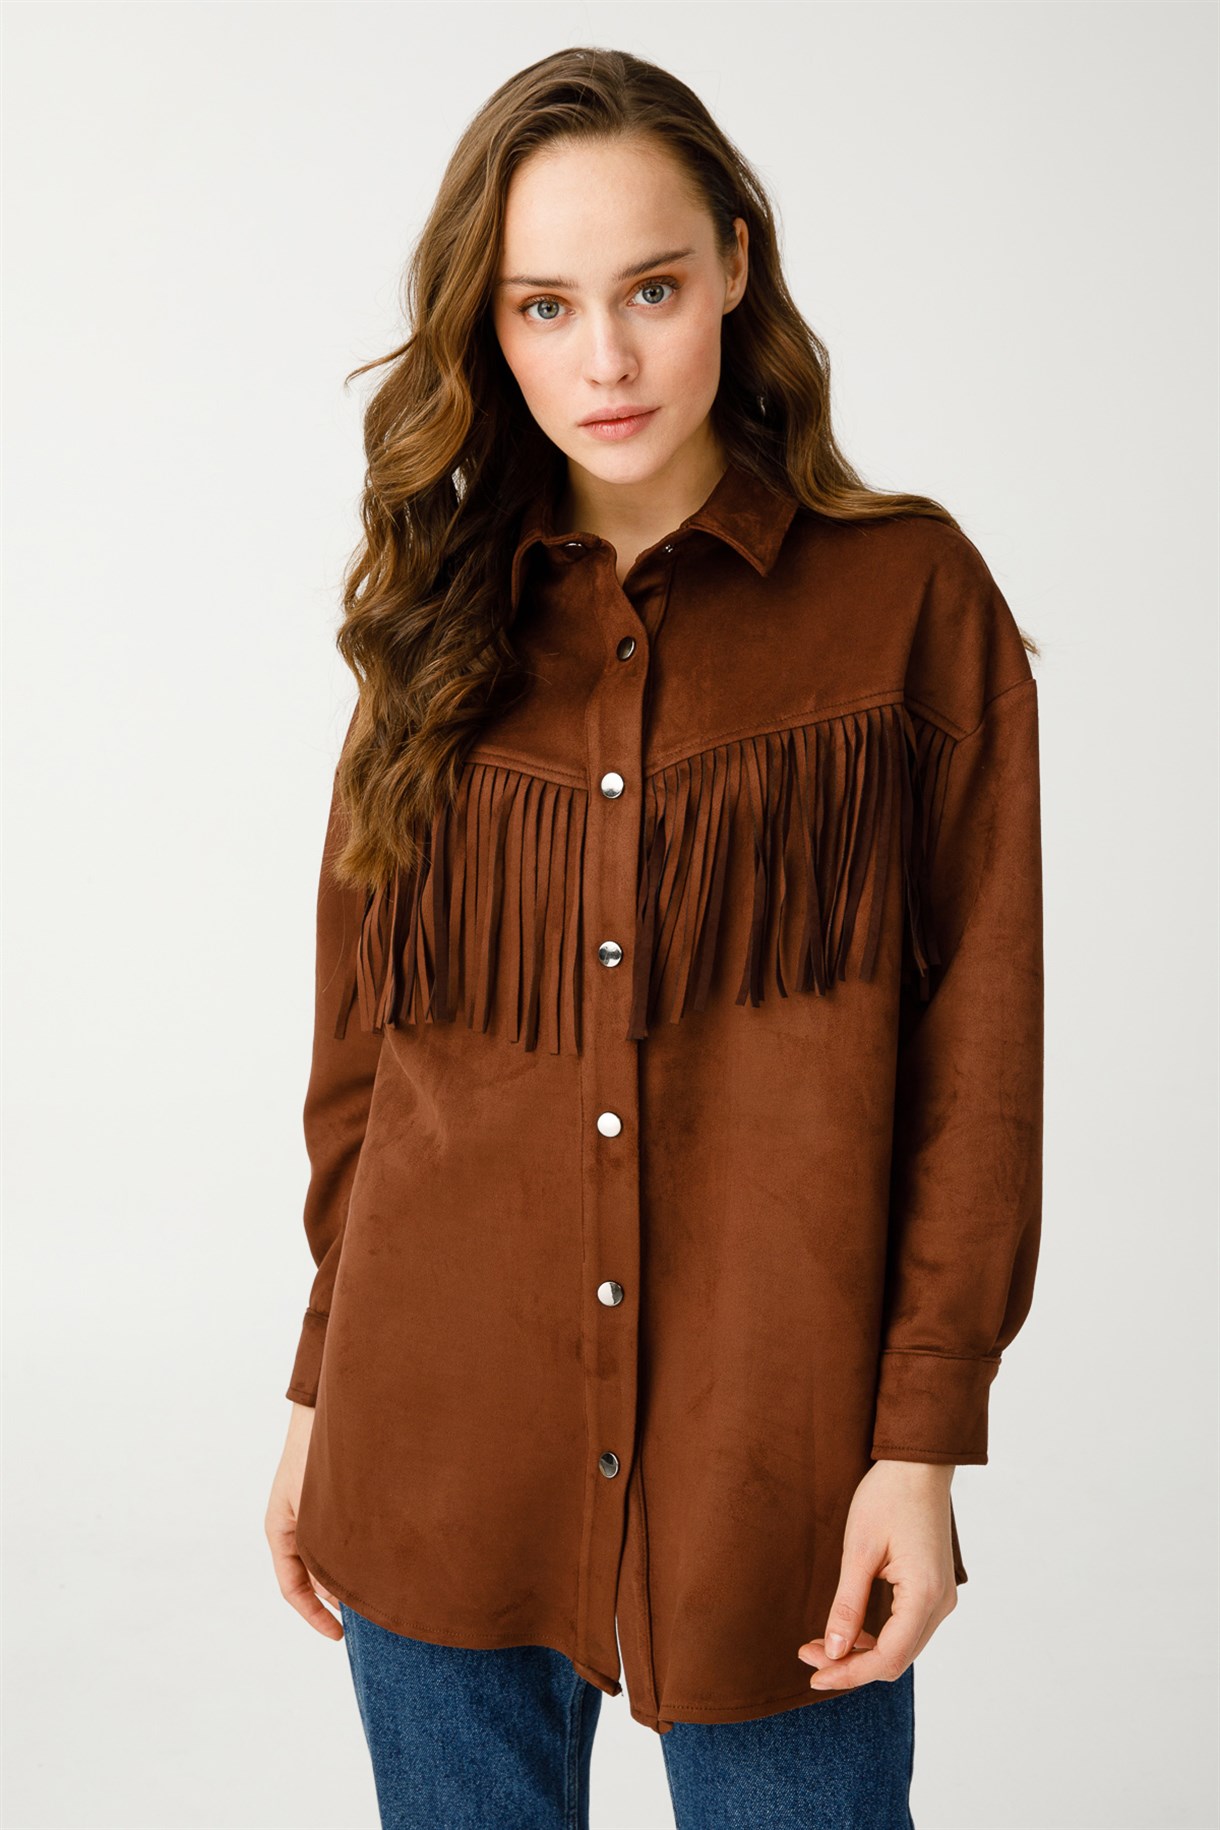 Tufted Suede Shirt Jacket